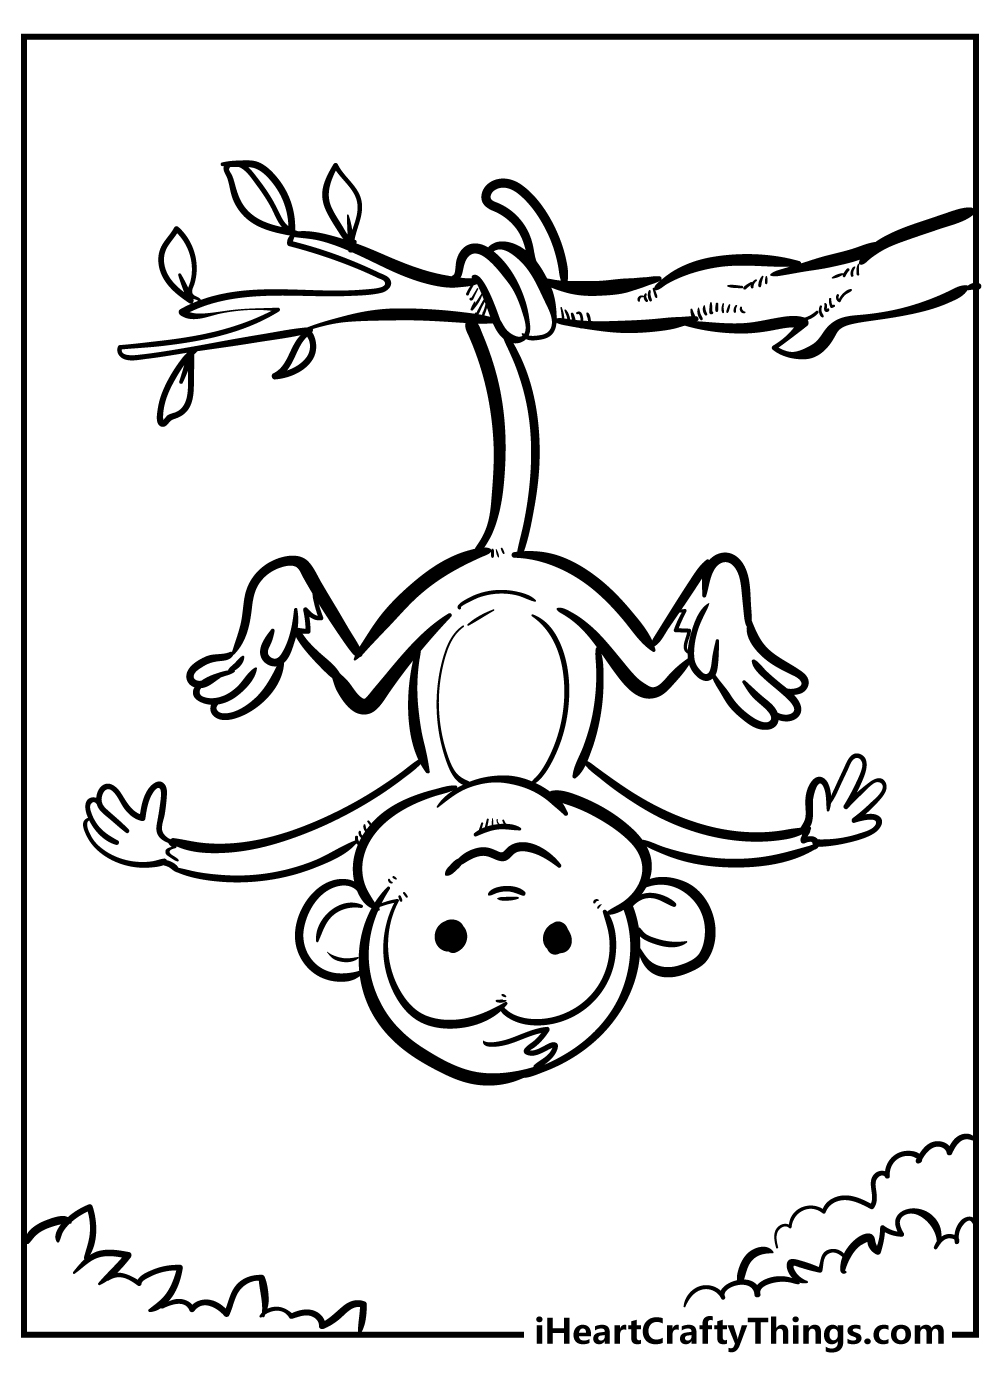 Monkey coloring pages free printable